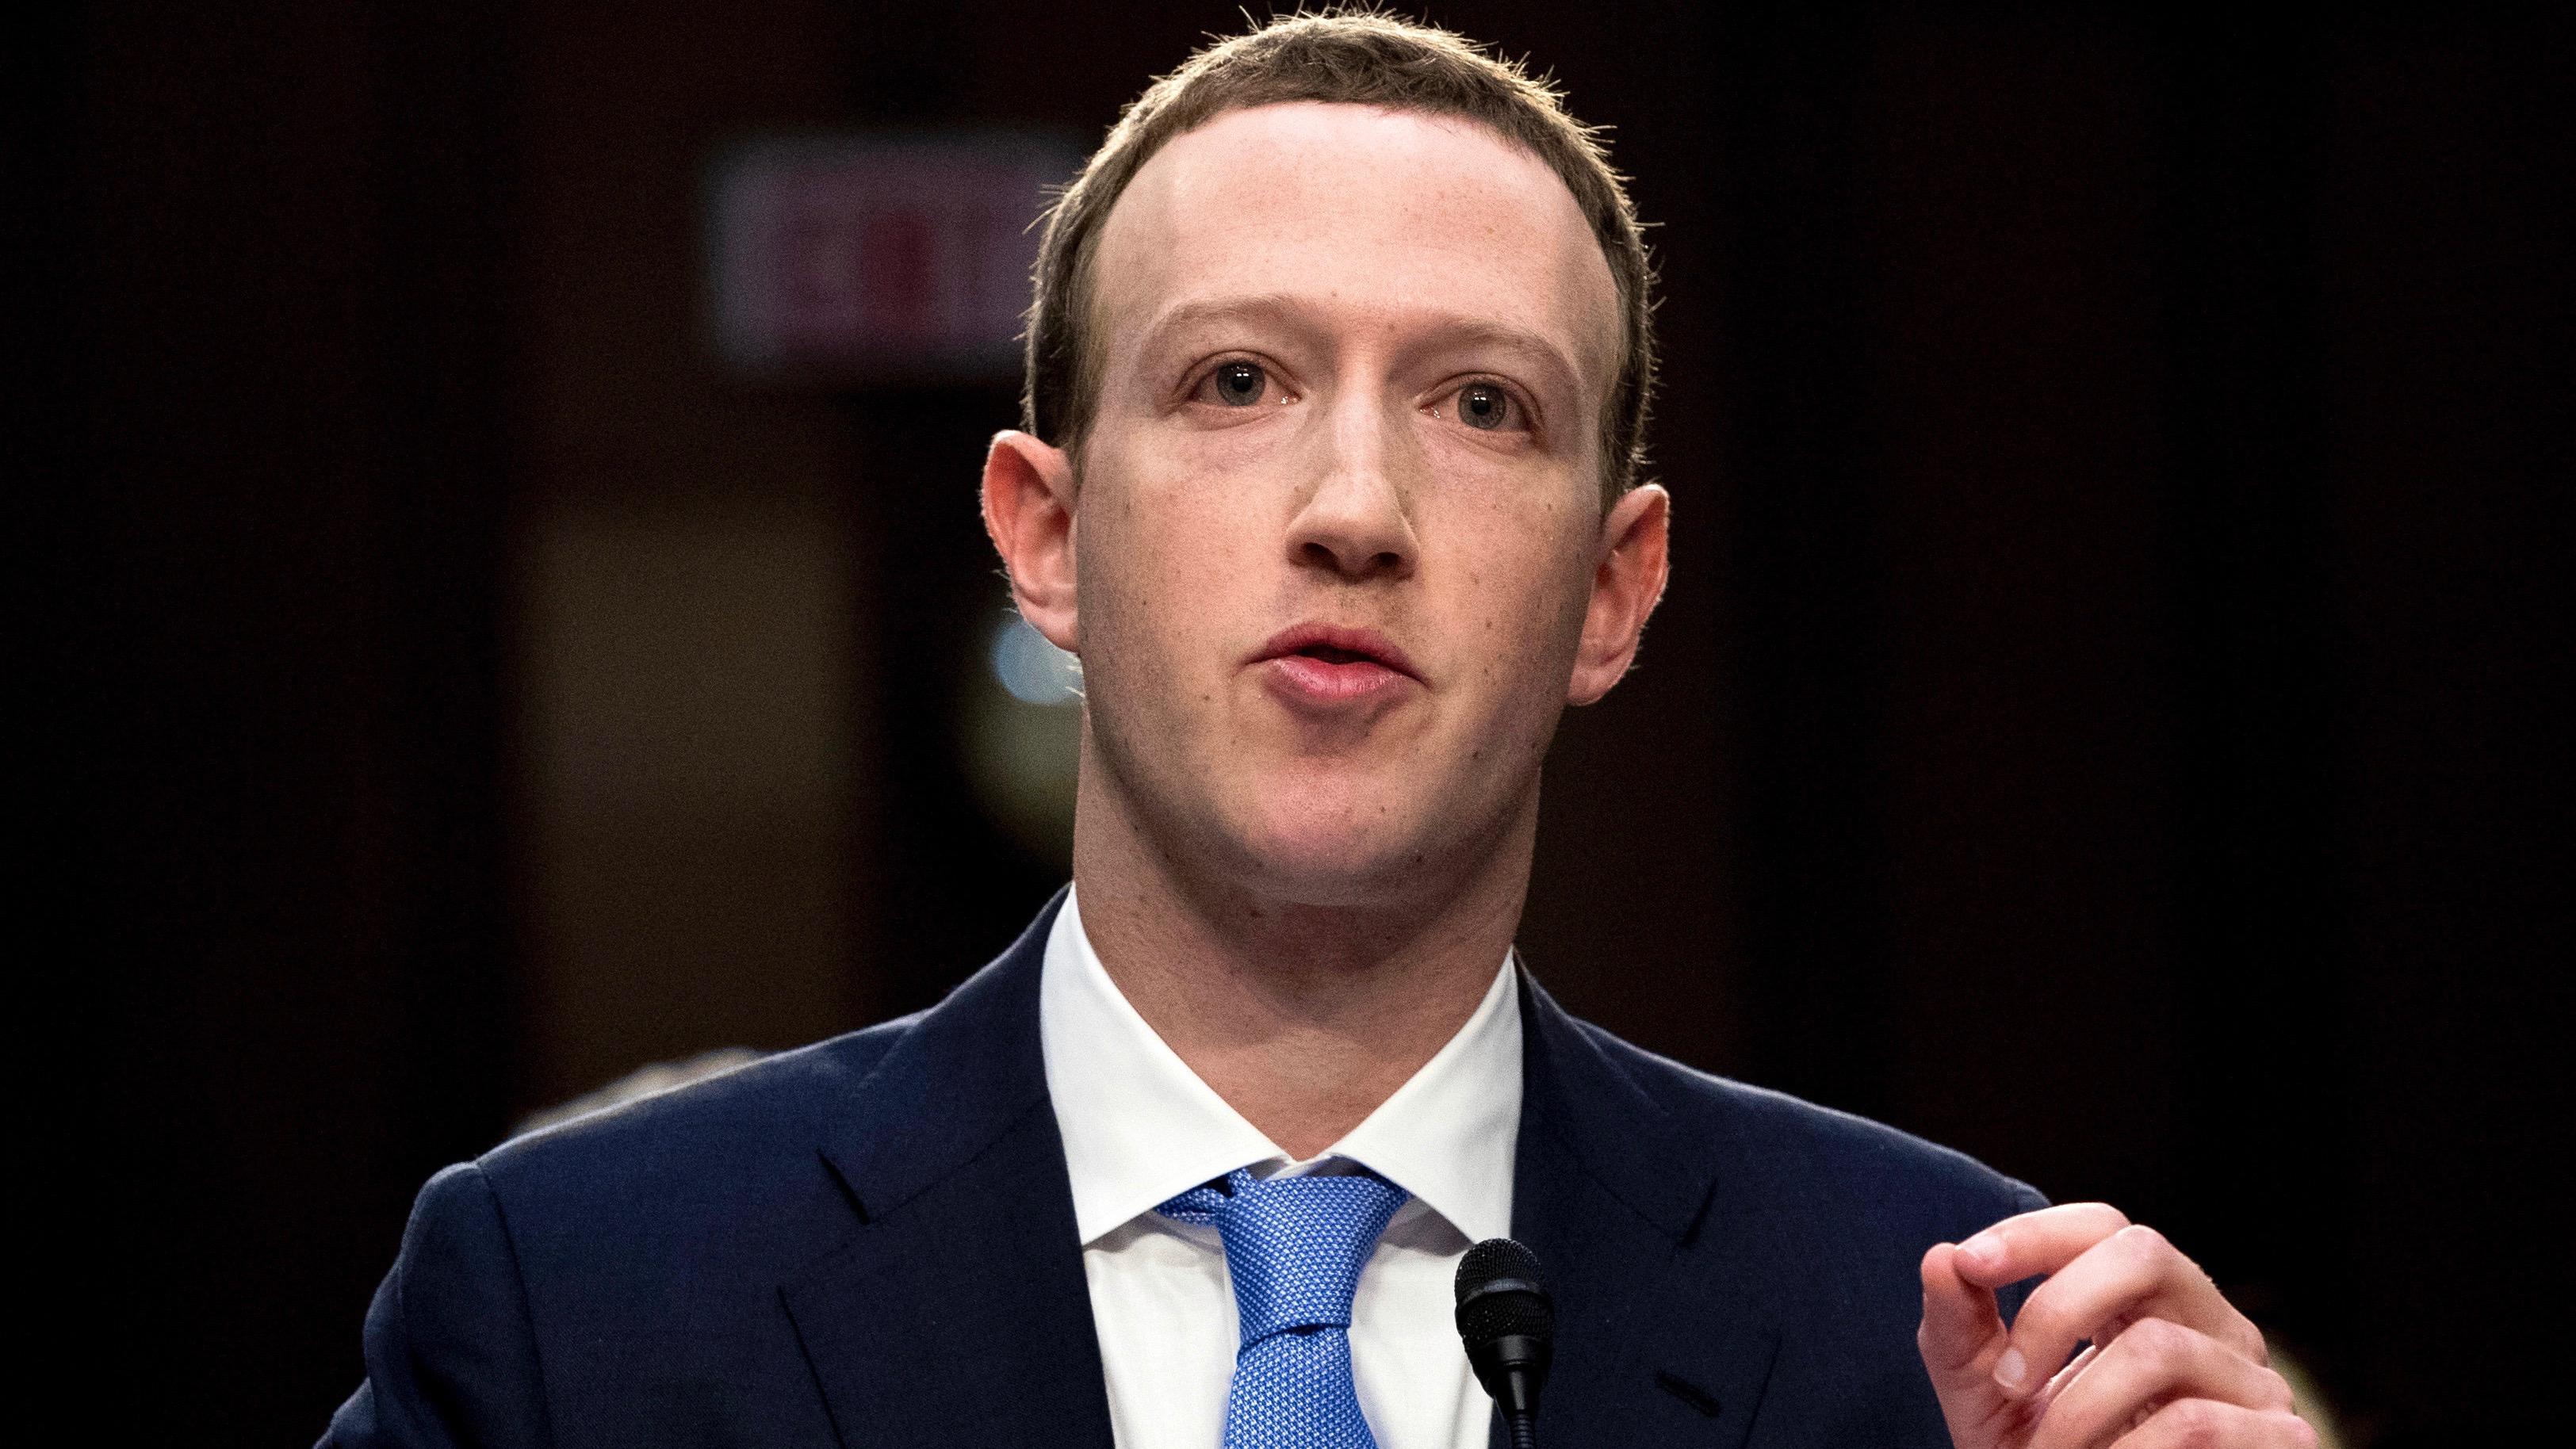 In this April 10, 2018, file photo, Facebook CEO Mark Zuckerberg testifies before a joint hearing of the Commerce and Judiciary Committees on Capitol Hill in Washington. (AP Photo / Andrew Harnik, File)